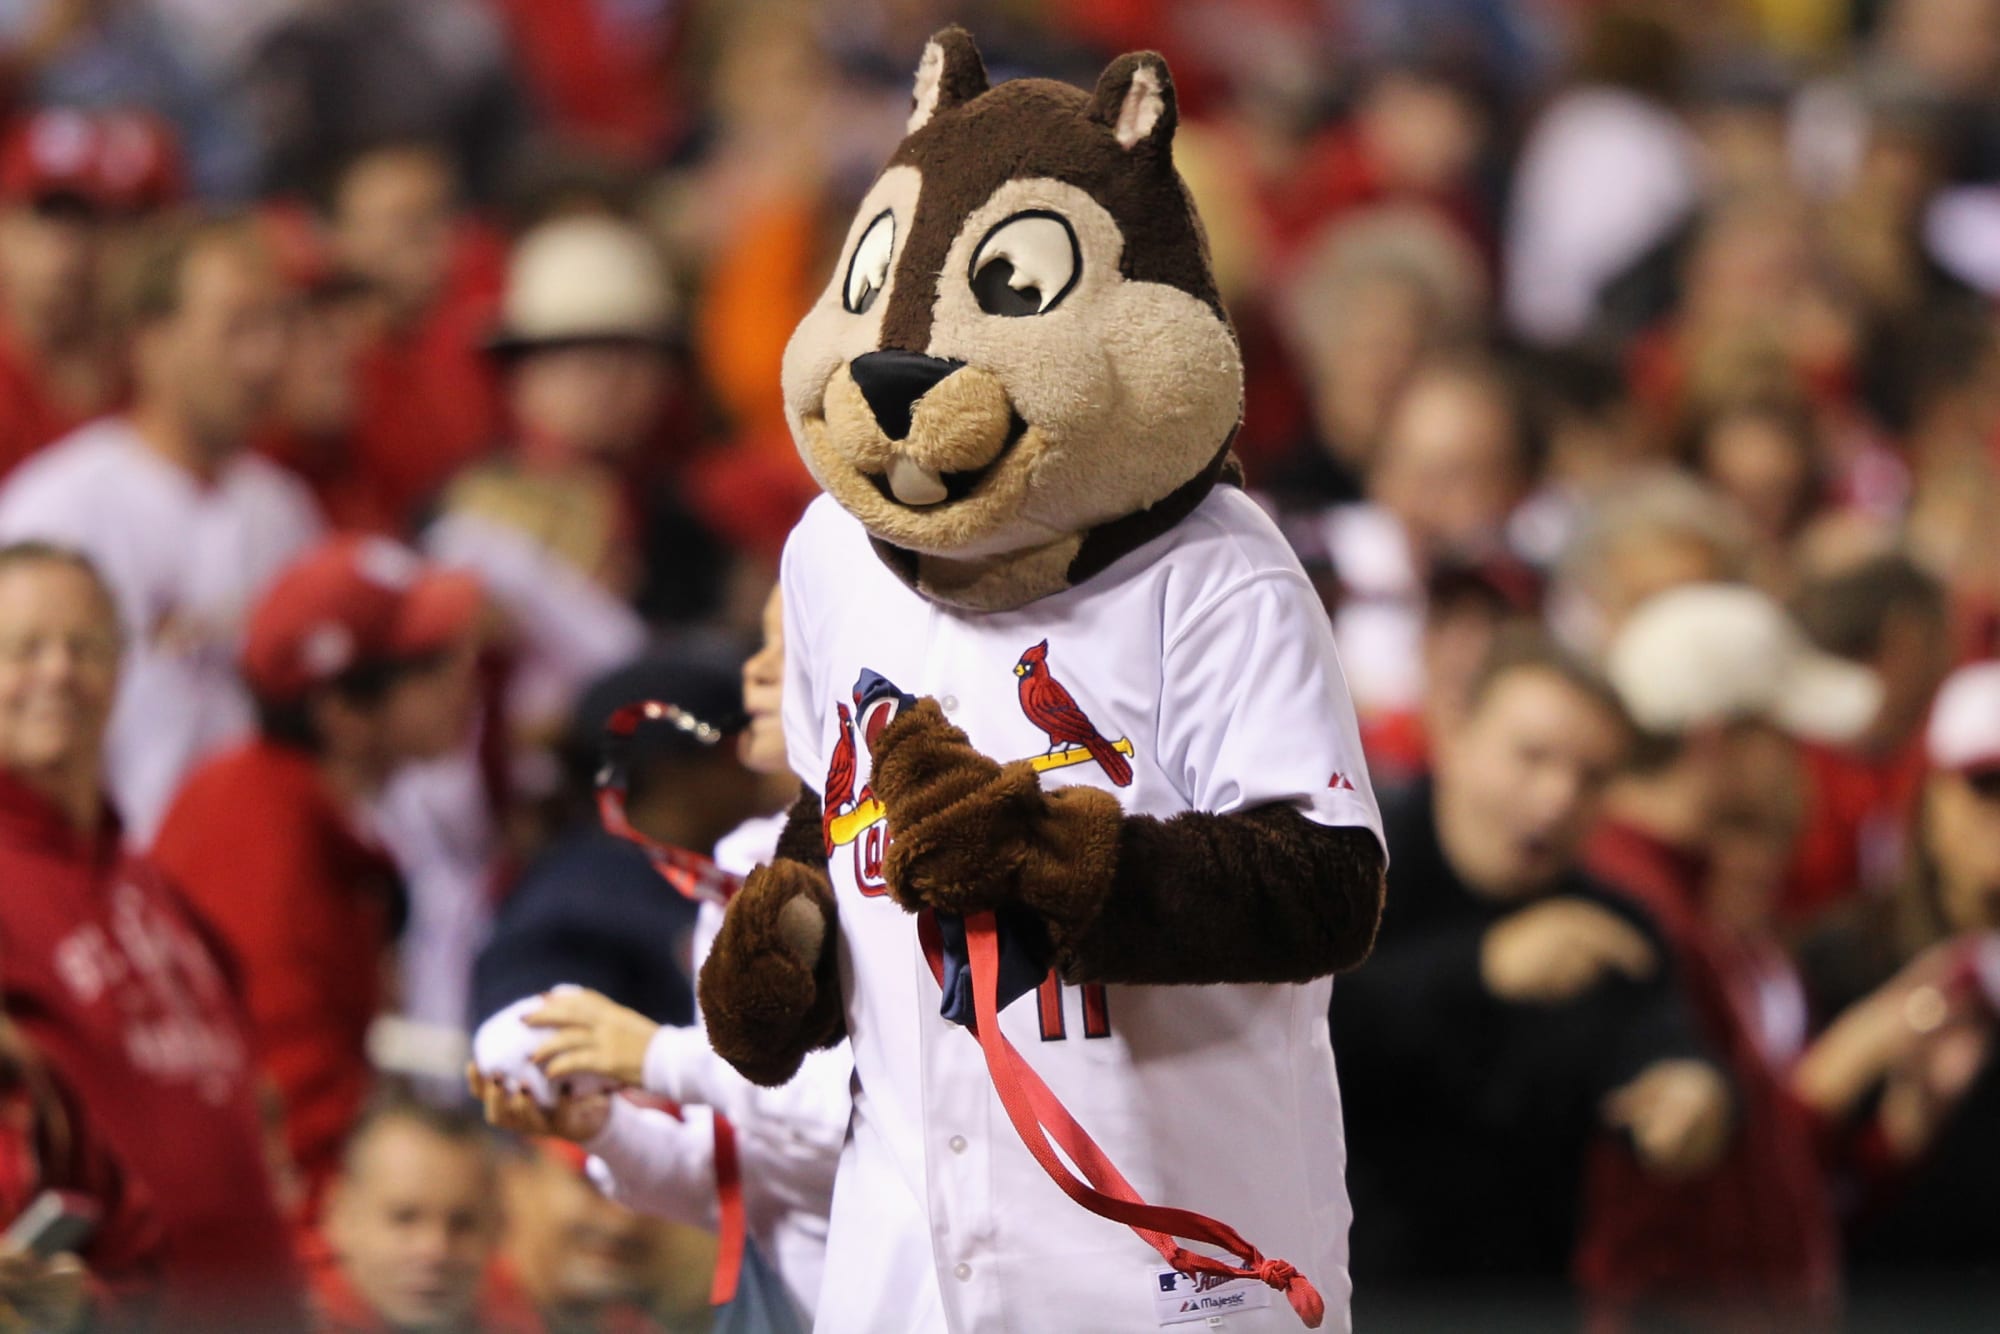 The St. Louis Cardinals are just a boring baseball team